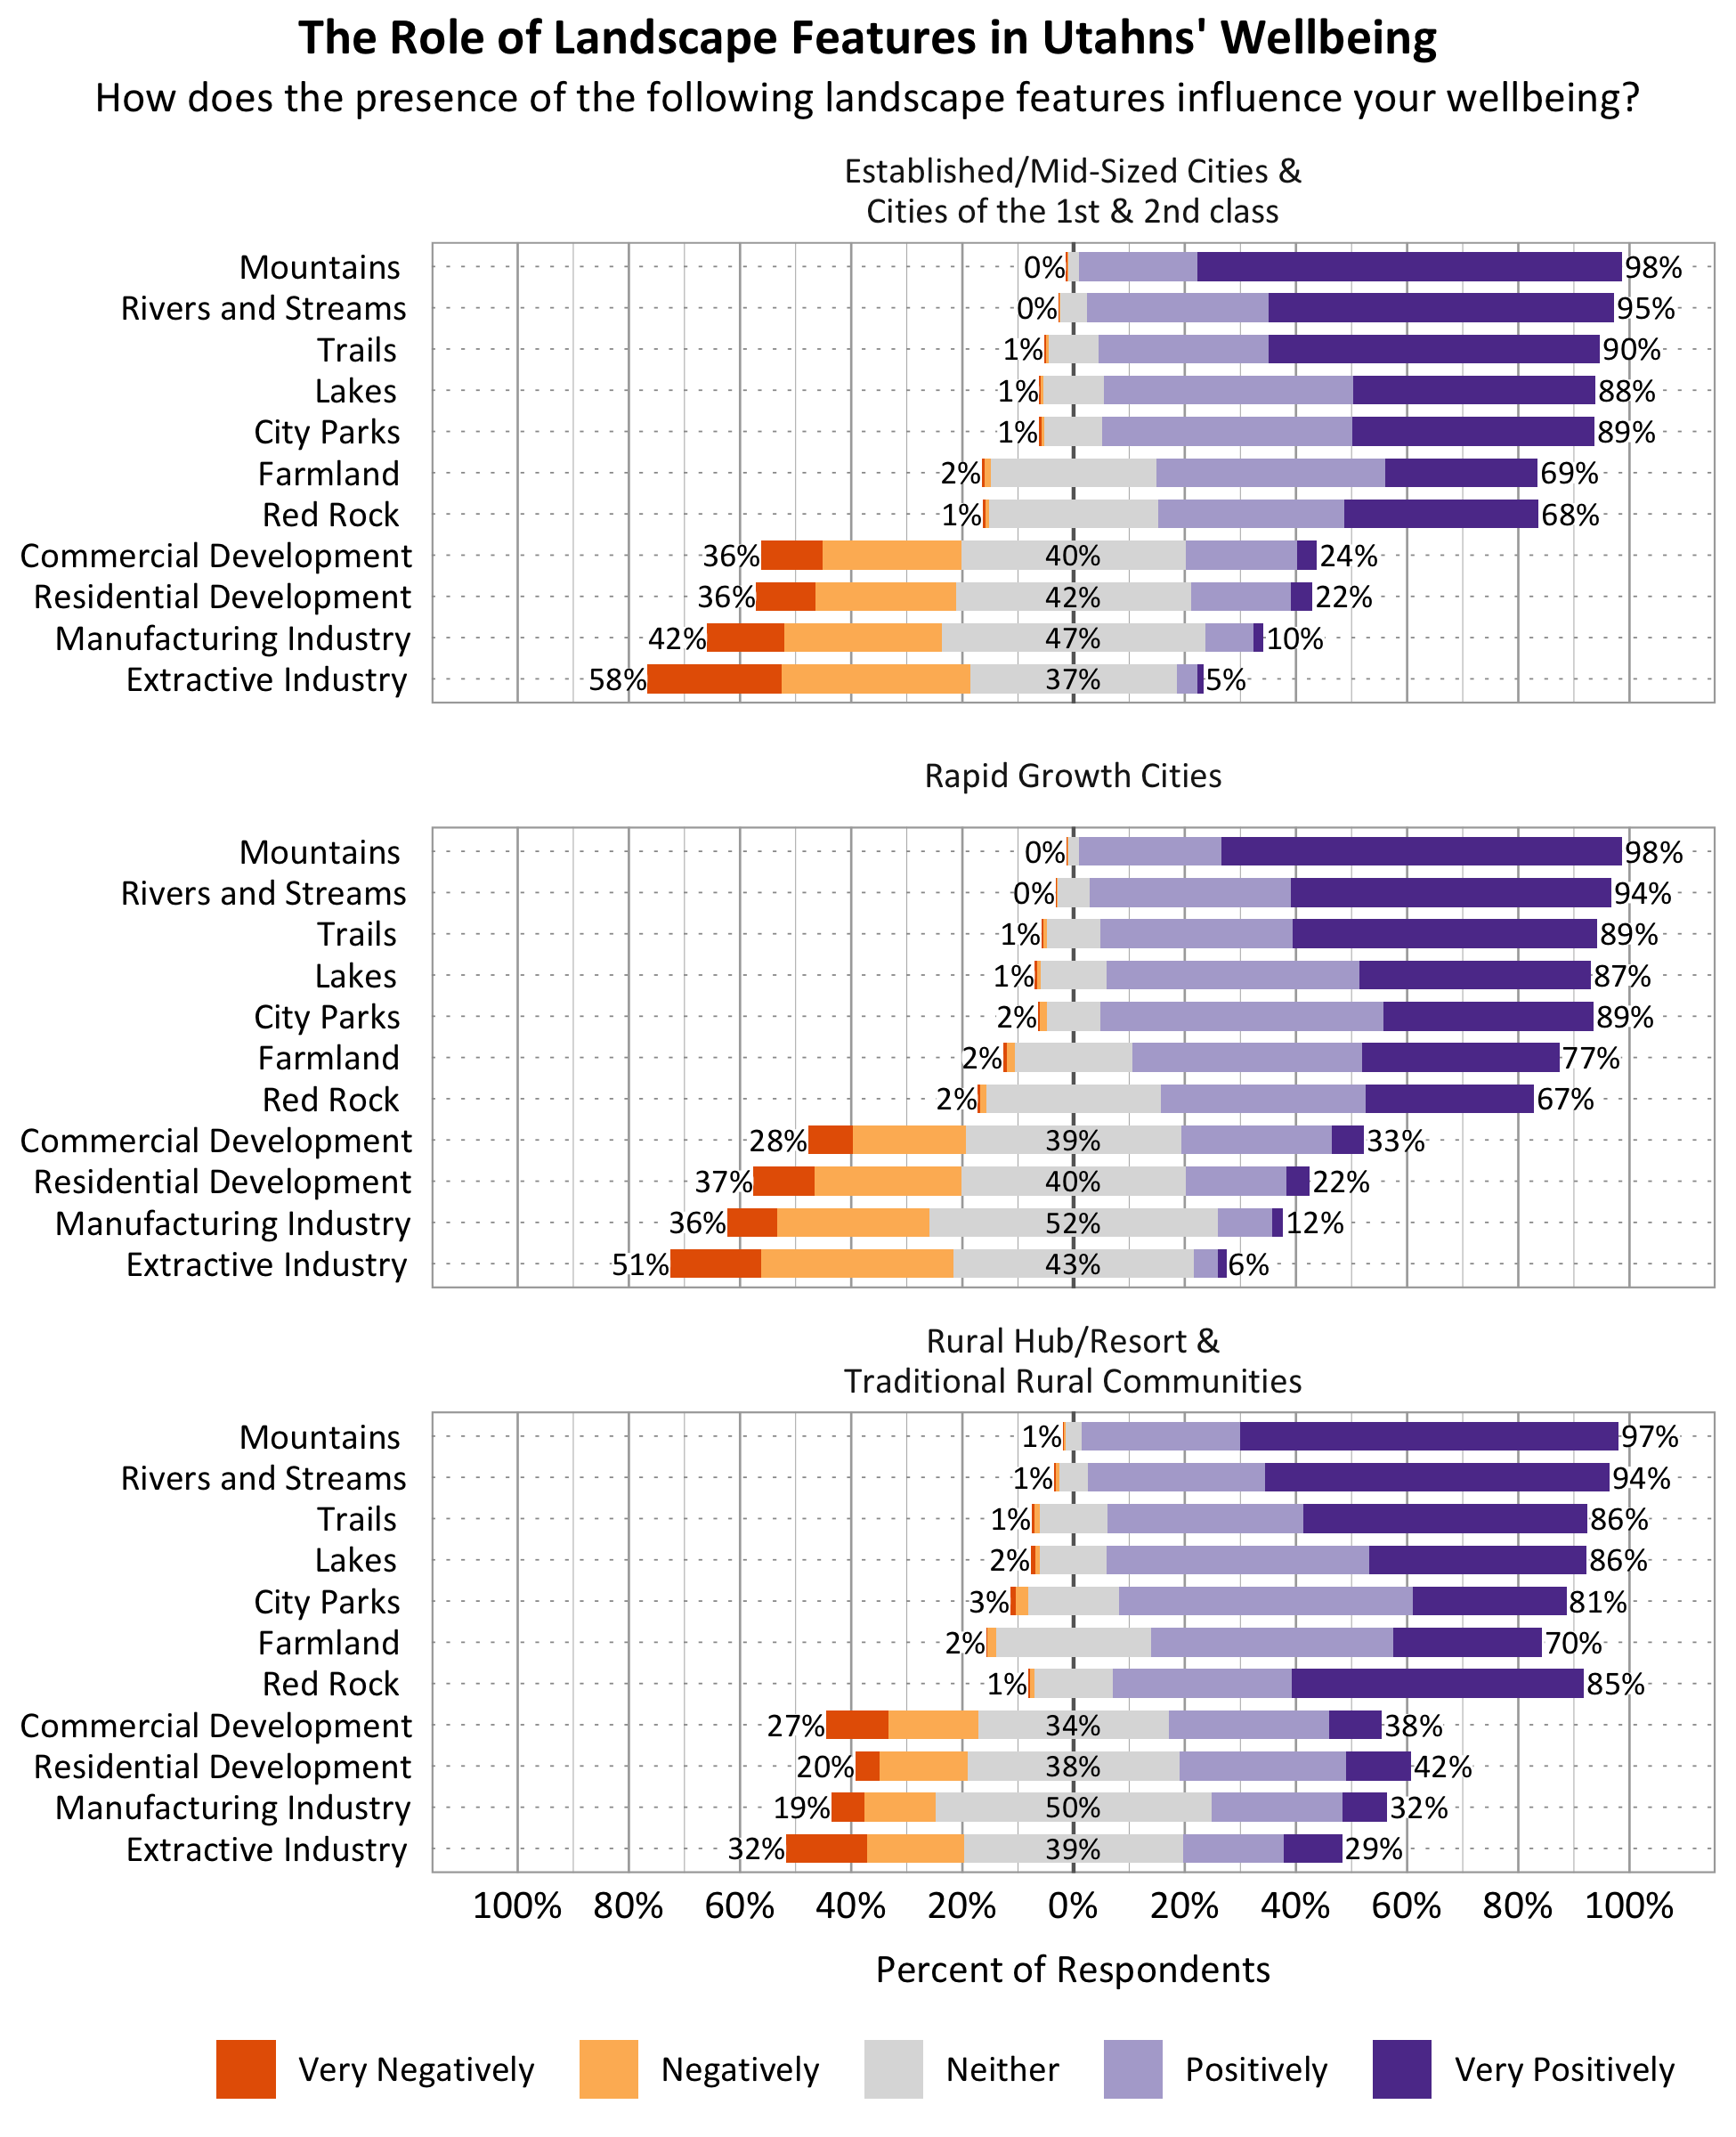 Graph 1: Type: Likert. Title: The Role of Landscape Features in Utahns’ Wellbeing within Established and Midsized cities and cities of the 1st and 2nd classes. Subtitle: How does the presence of the following landscape features influence your wellbeing? Data – Category: Mountains - 0% of respondents indicated very negatively or negatively, 2% indicated neither, 98% indicated positively or very positively; Rivers and Streams - 0% of respondents indicated very negatively or negatively, 5% indicated neither, 95% indicated positively or very positively; Trails - 1% of respondents indicated very negatively or negatively, 9% indicated neither, 90% indicated positively or very positively; Lakes - 1% of respondents indicated very negatively or negatively, 11% indicated neither, 88% indicated positively or very positively; City Parks - 1% of respondents indicated very negatively or negatively, 10% indicated neither, 89% indicated positively or very positively; Farmland - 2% of respondents indicated very negatively or negatively, 29% indicated neither, 69% indicated positively or very positively; Red Rock - 1% of respondents indicated very negatively or negatively, 31% indicated neither, 68% indicated positively or very positively; Commercial Development - 36% of respondents indicated very negatively or negatively, 40% indicated neither, 24% indicated positively or very positively; Residential Development - 26% of respondents indicated very negatively or negatively, 42% indicated neither, 22% indicated positively or very positively; Manufacturing Industry - 42% of respondents indicated very negatively or negatively, 47% indicated neither, 10% indicated positively or very positively; - Extractive Industry 58% of respondents indicated very negatively or negatively, 37% indicated neither, 5% indicated positively or very positively. Graph 2: Type: Likert. Title: The Role of Landscape Features in Utahns’ Wellbeing within Rapid Growth Cities. Subtitle: How does the presence of the following landscape features influence your wellbeing? Data – Category: Mountains - 0% of respondents indicated very negatively or negatively, 2% indicated neither, 98% indicated positively or very positively; Rivers and Streams - 0% of respondents indicated very negatively or negatively, 6% indicated neither, 94% indicated positively or very positively; Trails - 1% of respondents indicated very negatively or negatively, 10% indicated neither, 89% indicated positively or very positively; Lakes - 1% of respondents indicated very negatively or negatively, 12% indicated neither, 87% indicated positively or very positively; City Parks - 2% of respondents indicated very negatively or negatively, 9% indicated neither, 89% indicated positively or very positively; Farmland - 2% of respondents indicated very negatively or negatively, 21% indicated neither, 77% indicated positively or very positively; Red Rock - 2% of respondents indicated very negatively or negatively, 31% indicated neither, 67% indicated positively or very positively; Commercial Development - 28% of respondents indicated very negatively or negatively, 39% indicated neither, 33% indicated positively or very positively; Residential Development - 37% of respondents indicated very negatively or negatively, 40% indicated neither, 22% indicated positively or very positively; Manufacturing Industry - 36% of respondents indicated very negatively or negatively, 52% indicated neither, 12% indicated positively or very positively; - Extractive Industry 51% of respondents indicated very negatively or negatively, 43% indicated neither, 6% indicated positively or very positively. Graph 3: Type: Likert. Title: The Role of Landscape Features in Utahns’ Wellbeing within Rural Hub/Resort & Traditional Rural Communities. Subtitle: How does the presence of the following landscape features influence your wellbeing? Data – Category: Mountains - 1% of respondents indicated very negatively or negatively, 2% indicated neither, 97% indicated positively or very positively; Rivers and Streams - 1% of respondents indicated very negatively or negatively, 5% indicated neither, 94% indicated positively or very positively; Trails - 1% of respondents indicated very negatively or negatively, 13% indicated neither, 86% indicated positively or very positively; Lakes - 2% of respondents indicated very negatively or negatively, 12% indicated neither, 86% indicated positively or very positively; City Parks - 3% of respondents indicated very negatively or negatively, 16% indicated neither, 81% indicated positively or very positively; Farmland - 2% of respondents indicated very negatively or negatively, 28% indicated neither, 70% indicated positively or very positively; Red Rock - 1% of respondents indicated very negatively or negatively, 14% indicated neither, 85% indicated positively or very positively; Commercial Development - 27% of respondents indicated very negatively or negatively, 34% indicated neither, 38% indicated positively or very positively; Residential Development - 20% of respondents indicated very negatively or negatively, 38% indicated neither, 42% indicated positively or very positively; Manufacturing Industry - 19% of respondents indicated very negatively or negatively, 50% indicated neither, 32% indicated positively or very positively; - Extractive Industry 32% of respondents indicated very negatively or negatively, 39% indicated neither, 29% indicated positively or very positively.